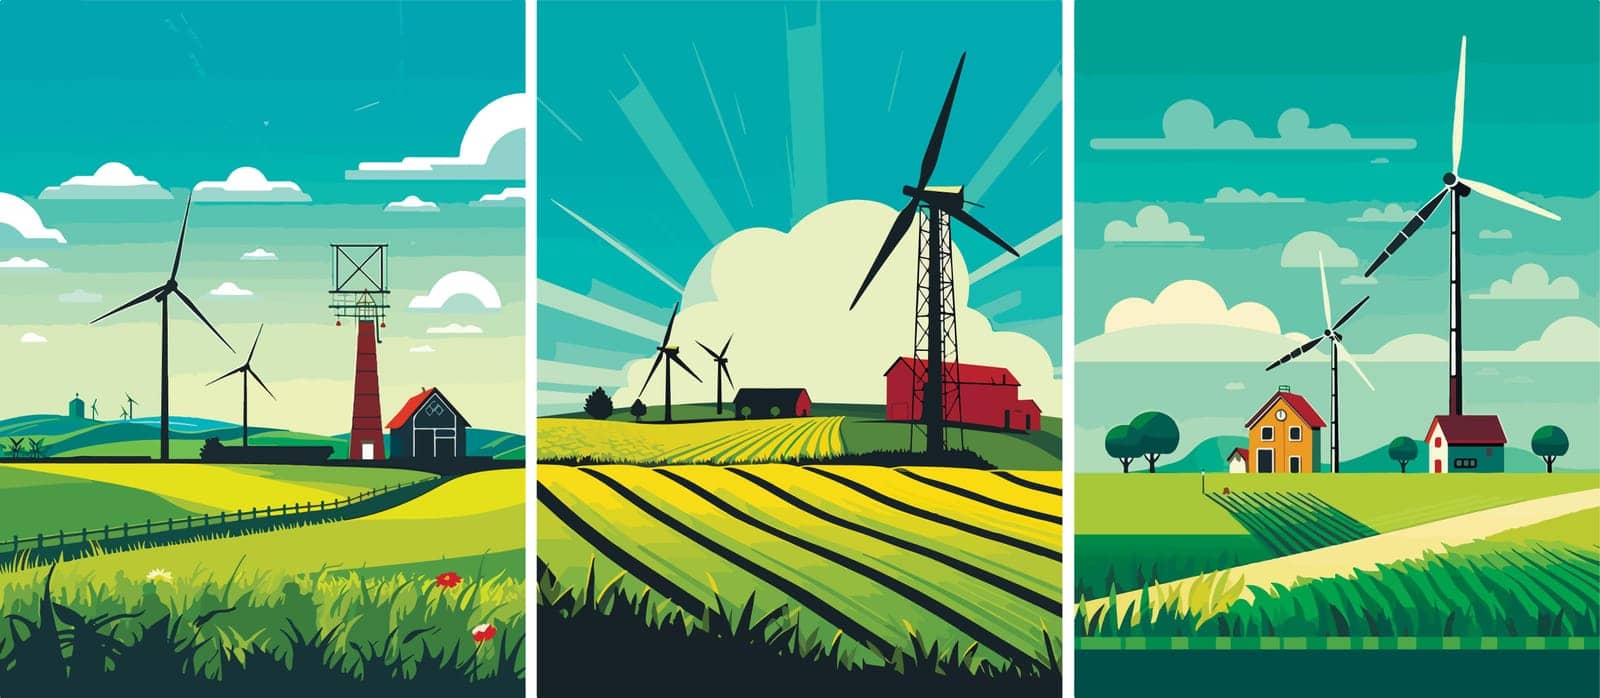 Wind power turbines and windmills vector illustration. A landscape with greenfields and turbines that transforms the kinetic energy in the wind into mechanical power.